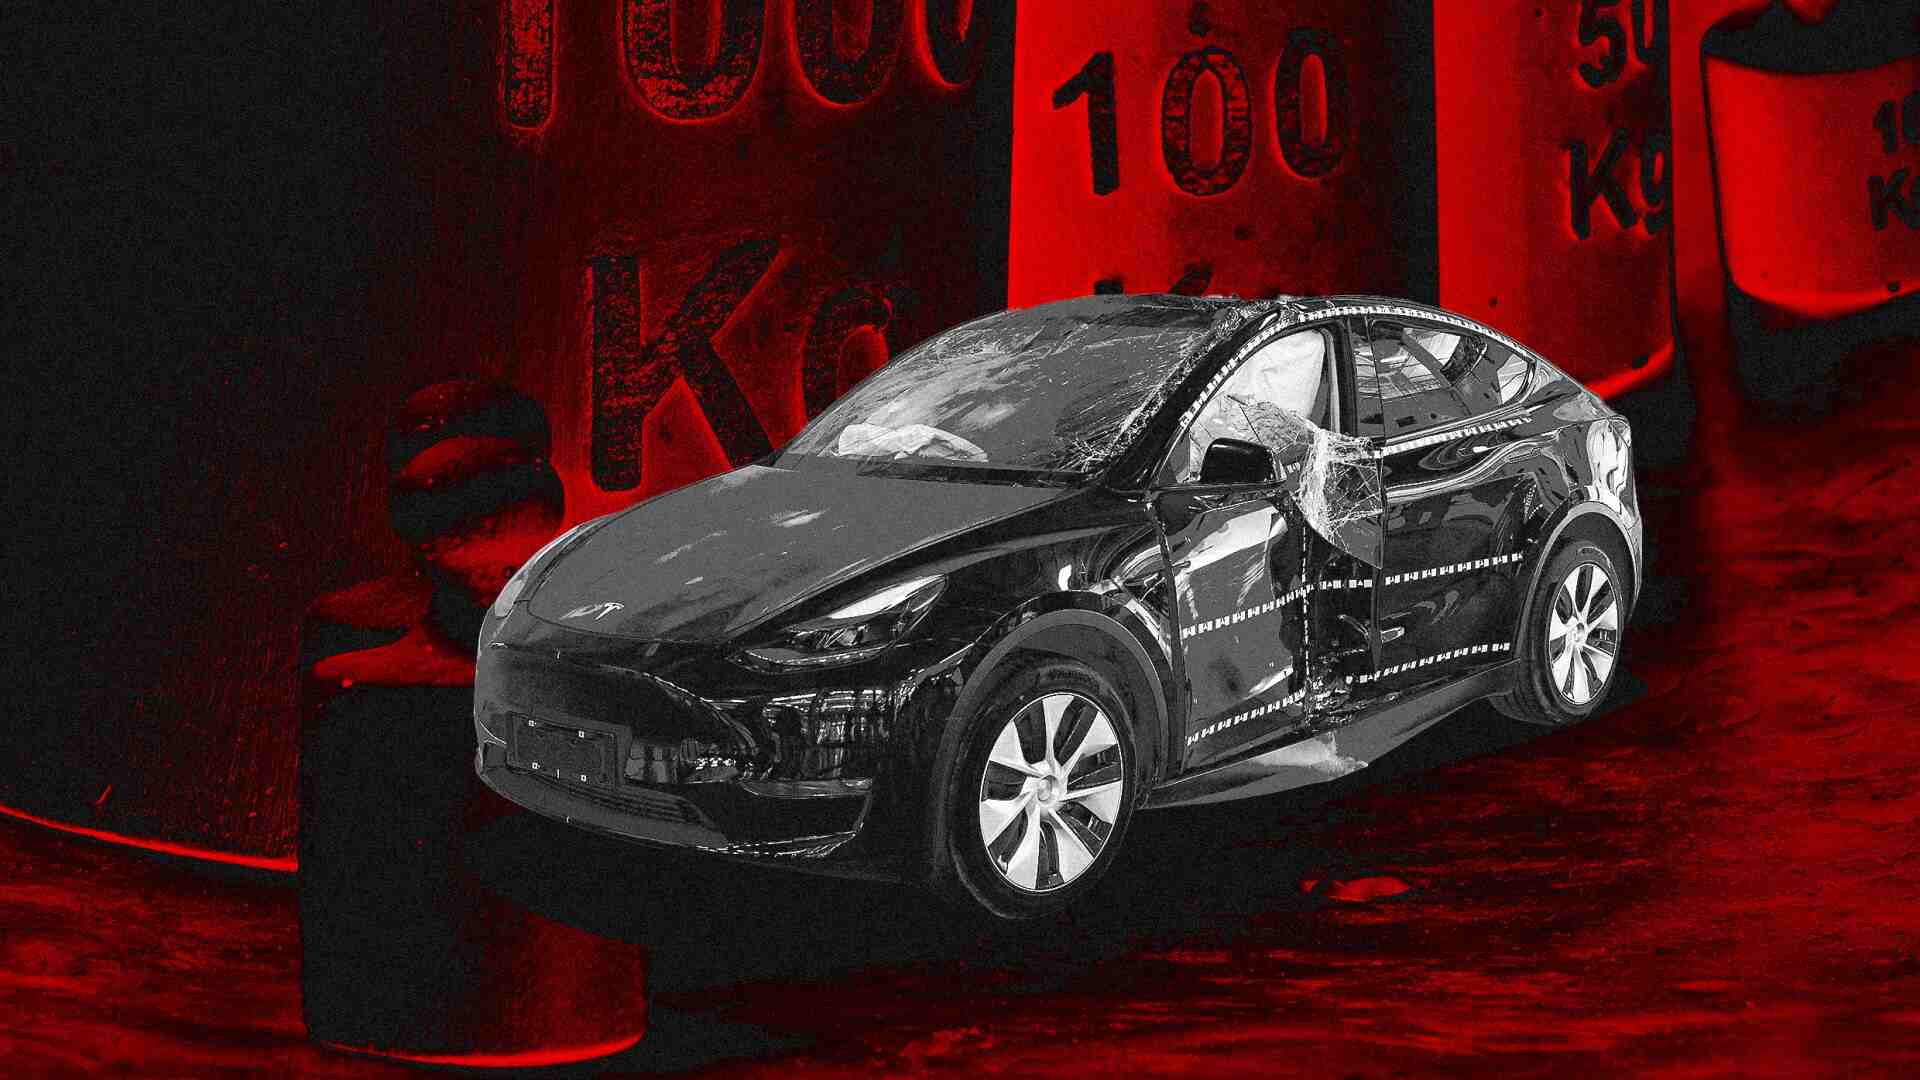 Better technologies, better safety: EVs usually are better in crashes than combustion vehicles